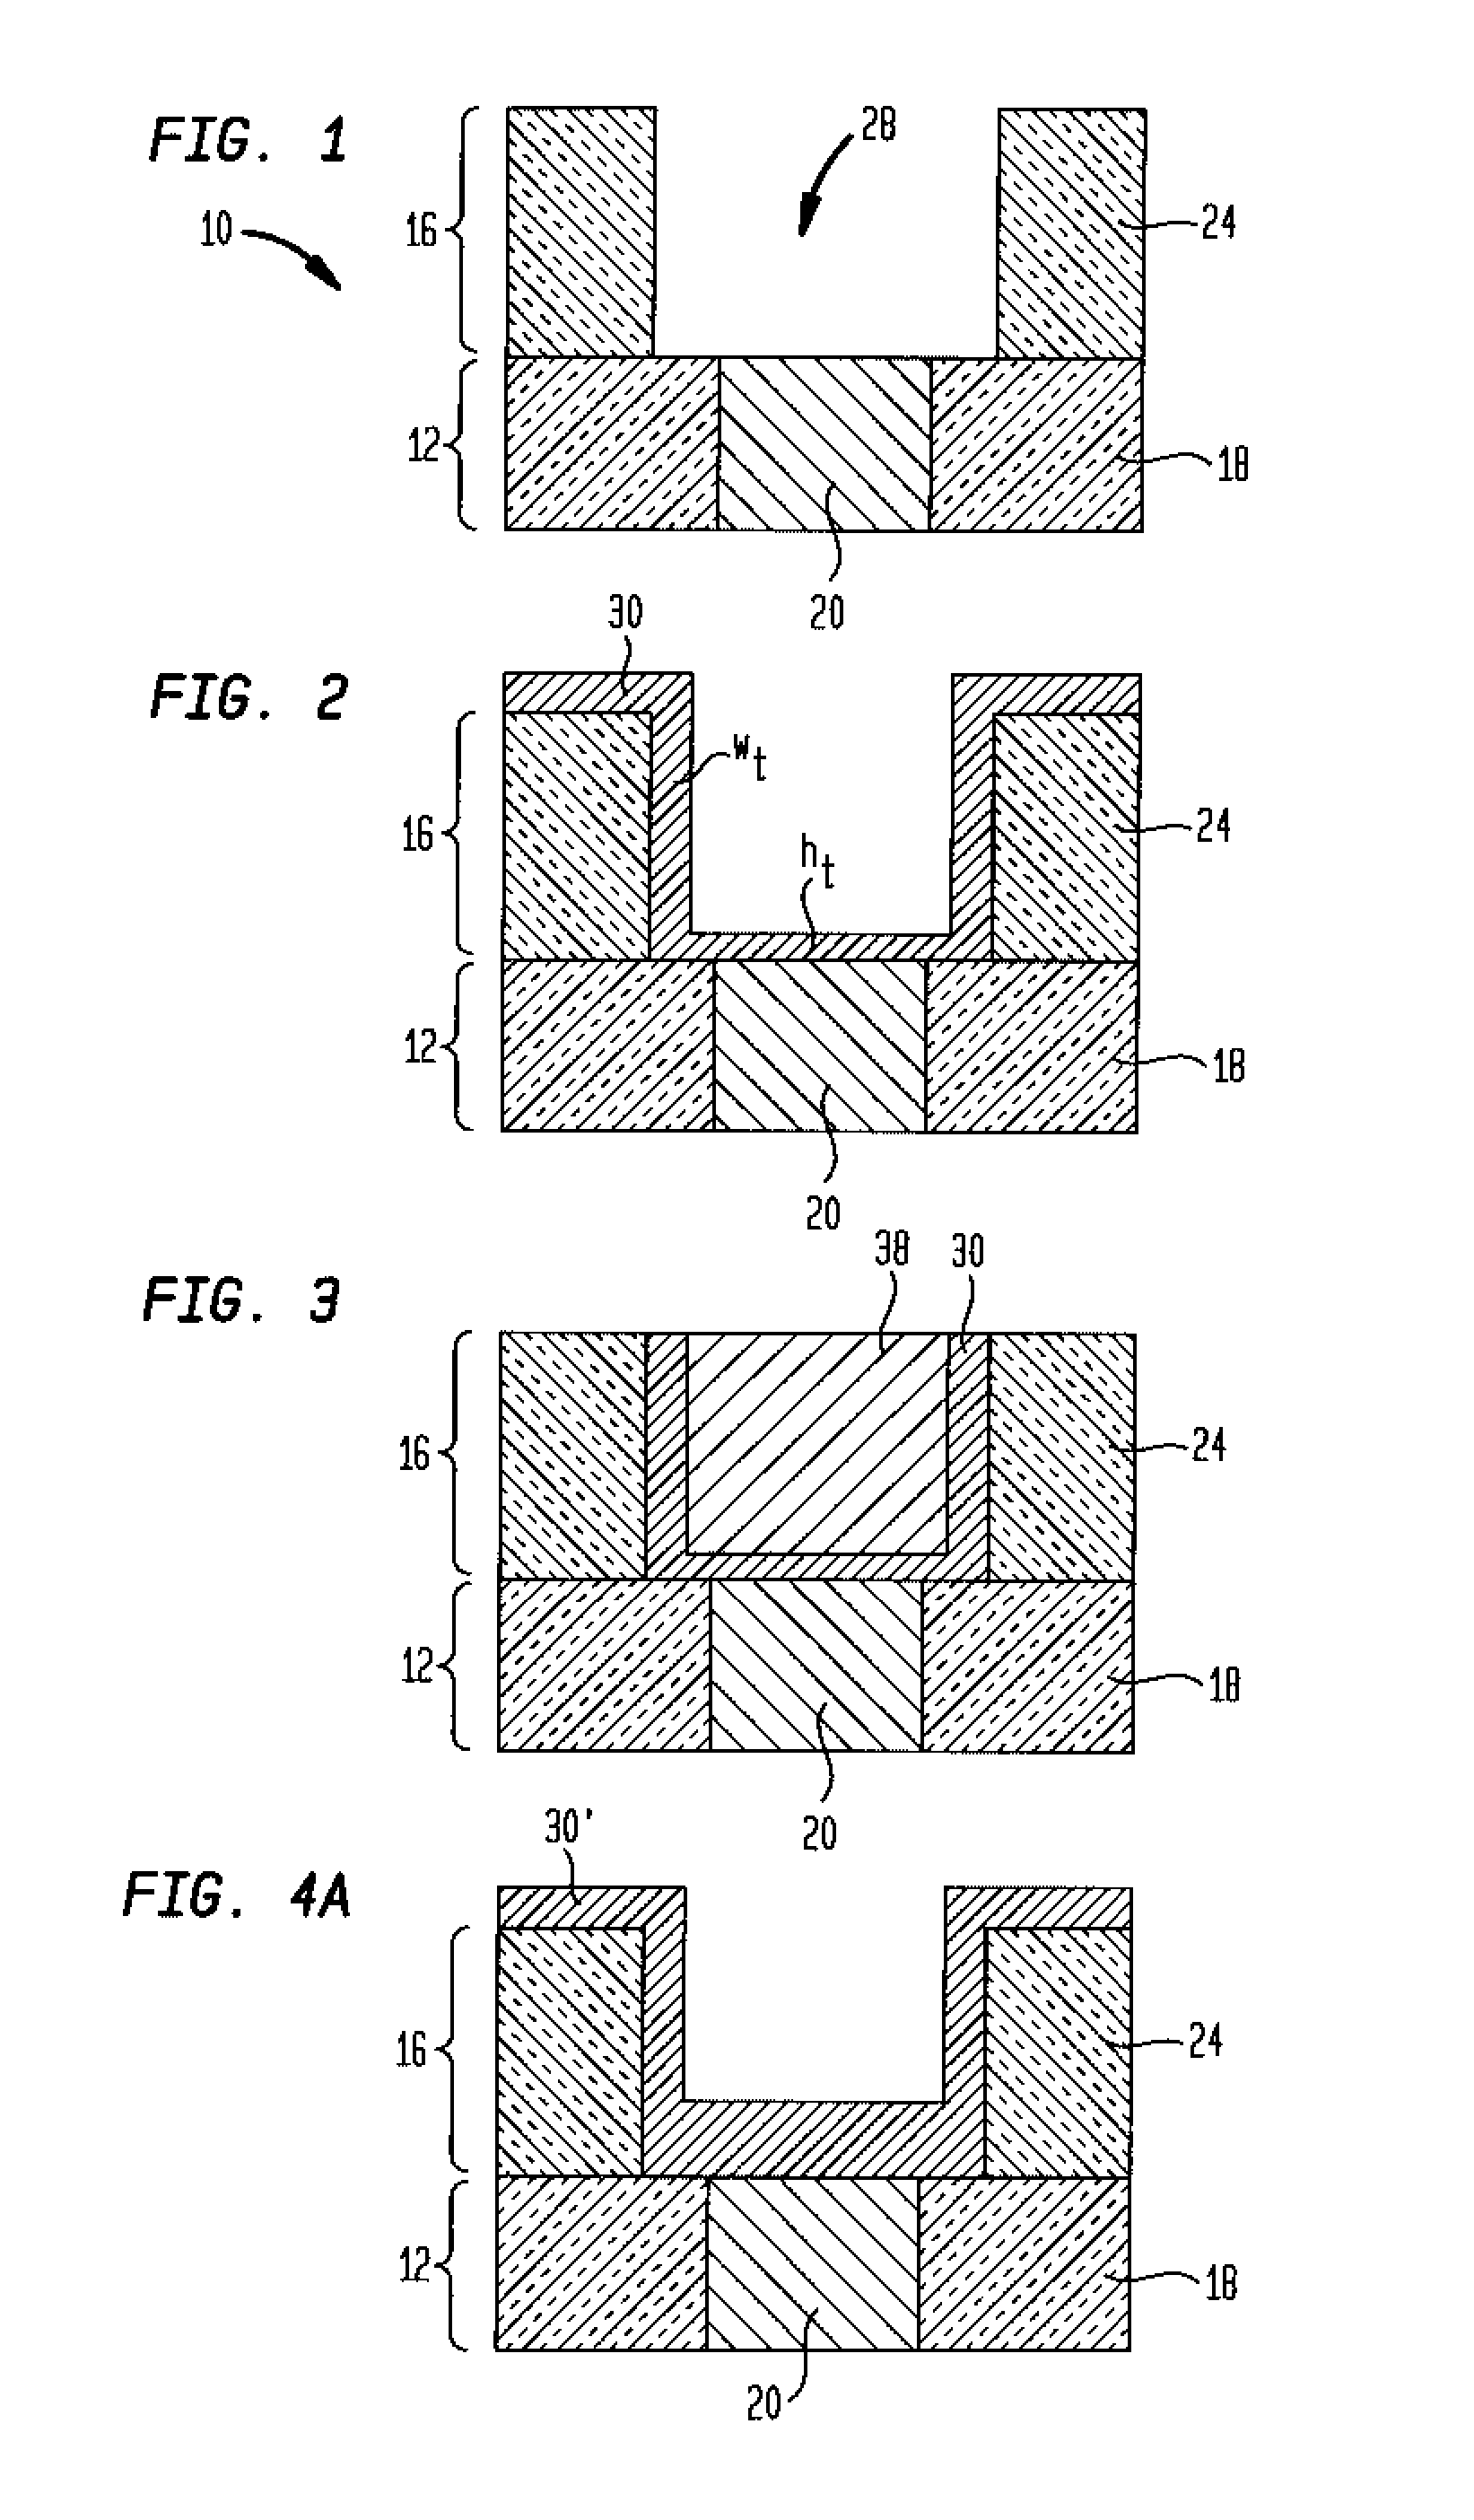 Interconnect metallization process with 100% or greater step coverage